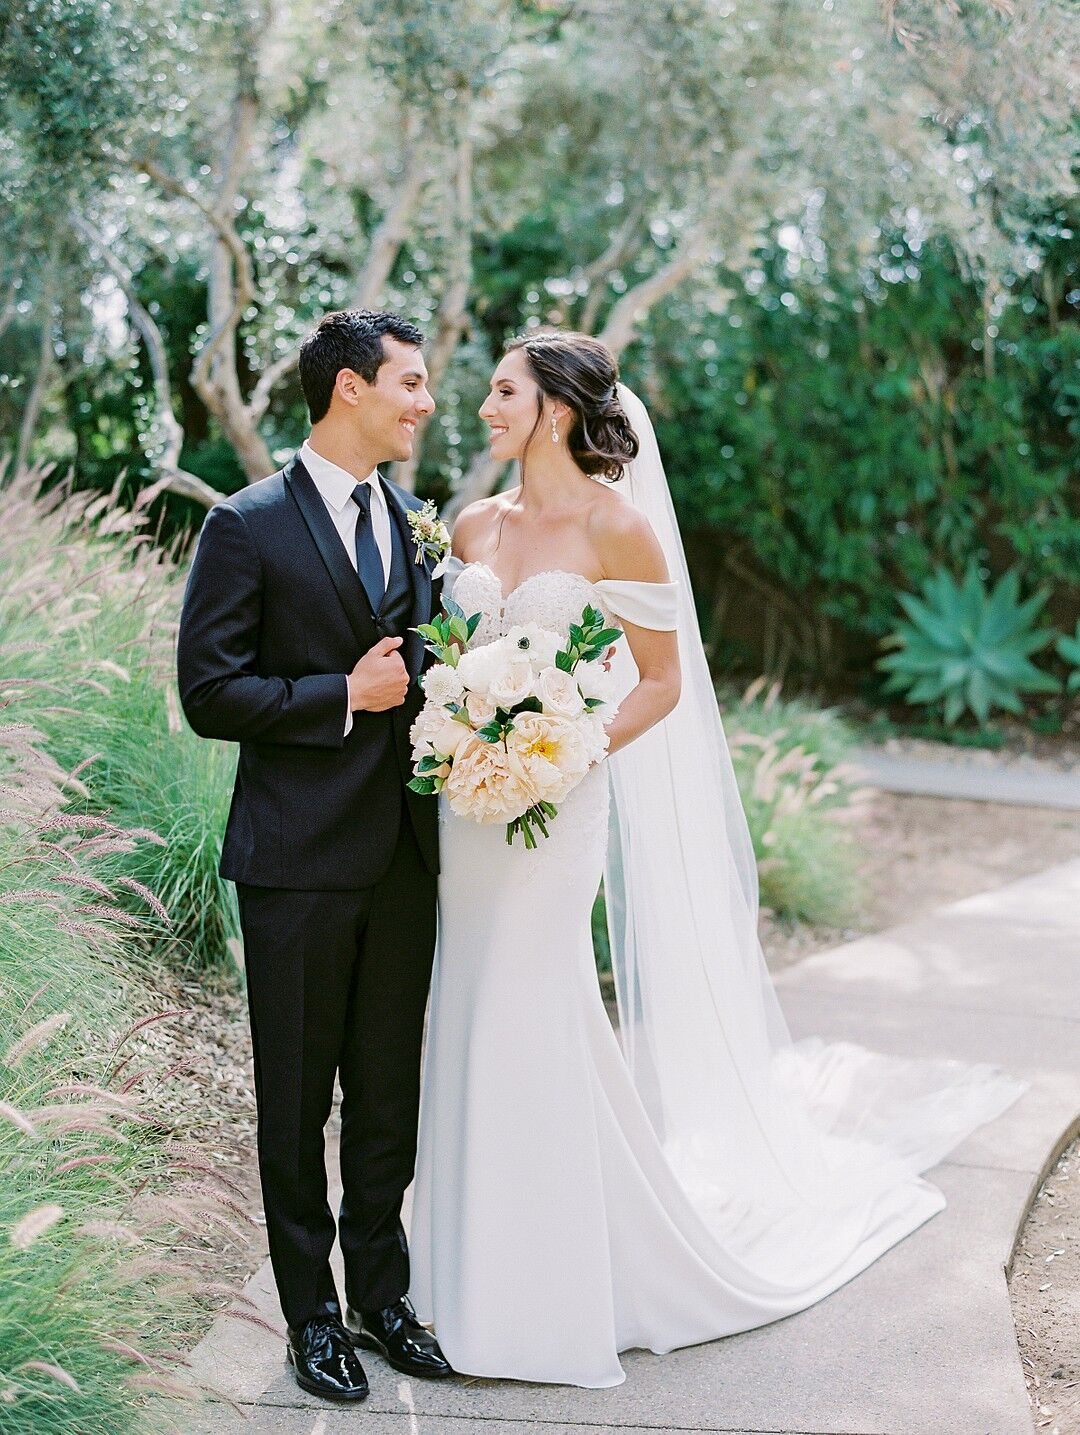 Romantic Couple with Black Tuxedo and Elegant Off-the-Shoulder Dress